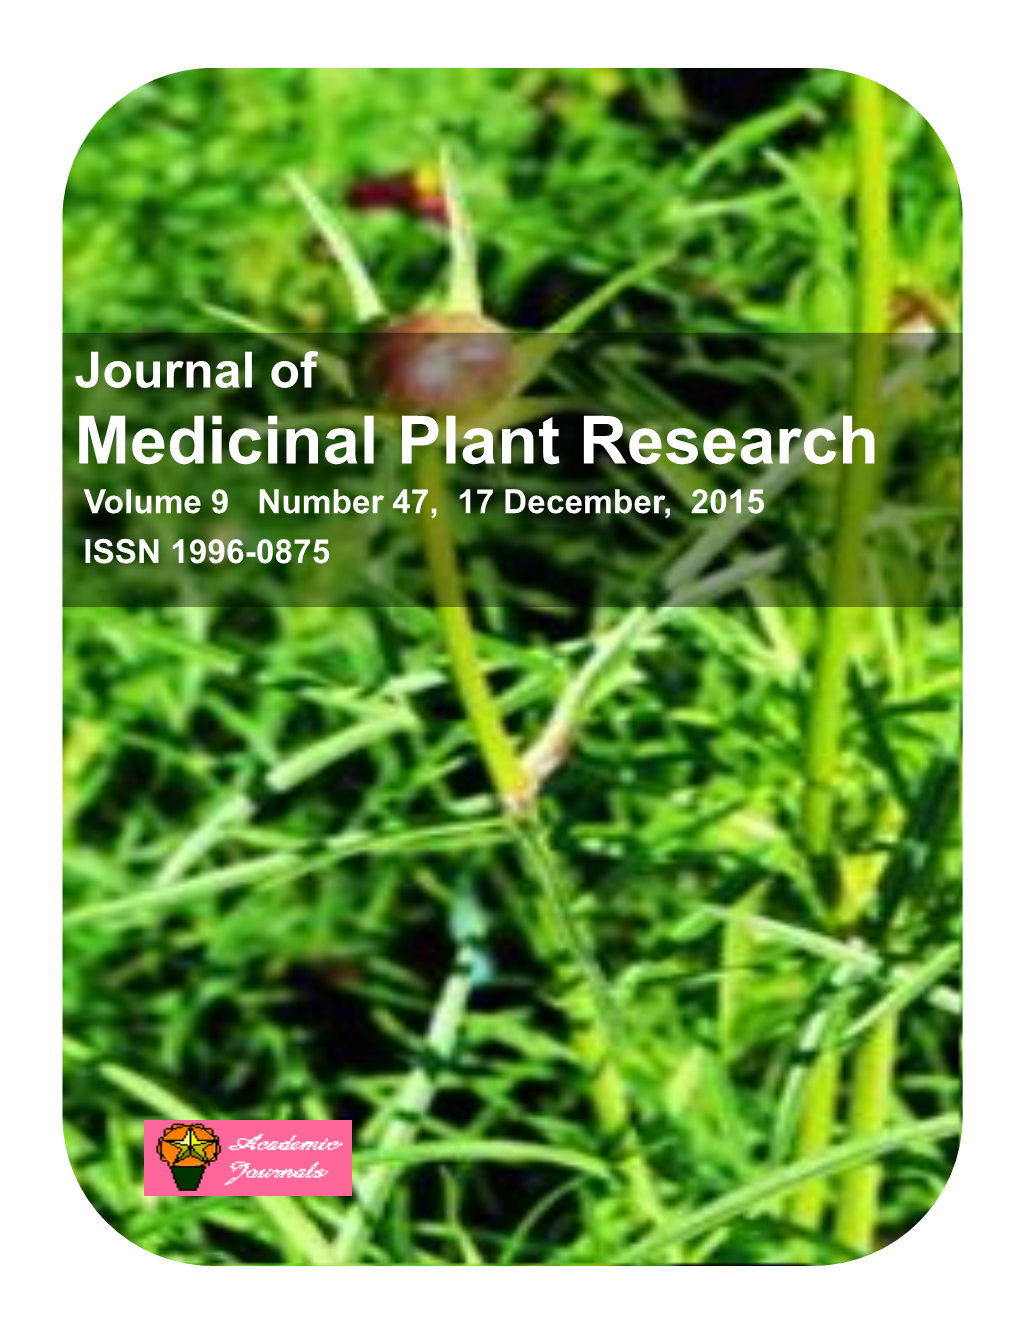 Medicinal Plant Research Volume 9 Number 47, 17 December, 2015 ISSN 1996-0875